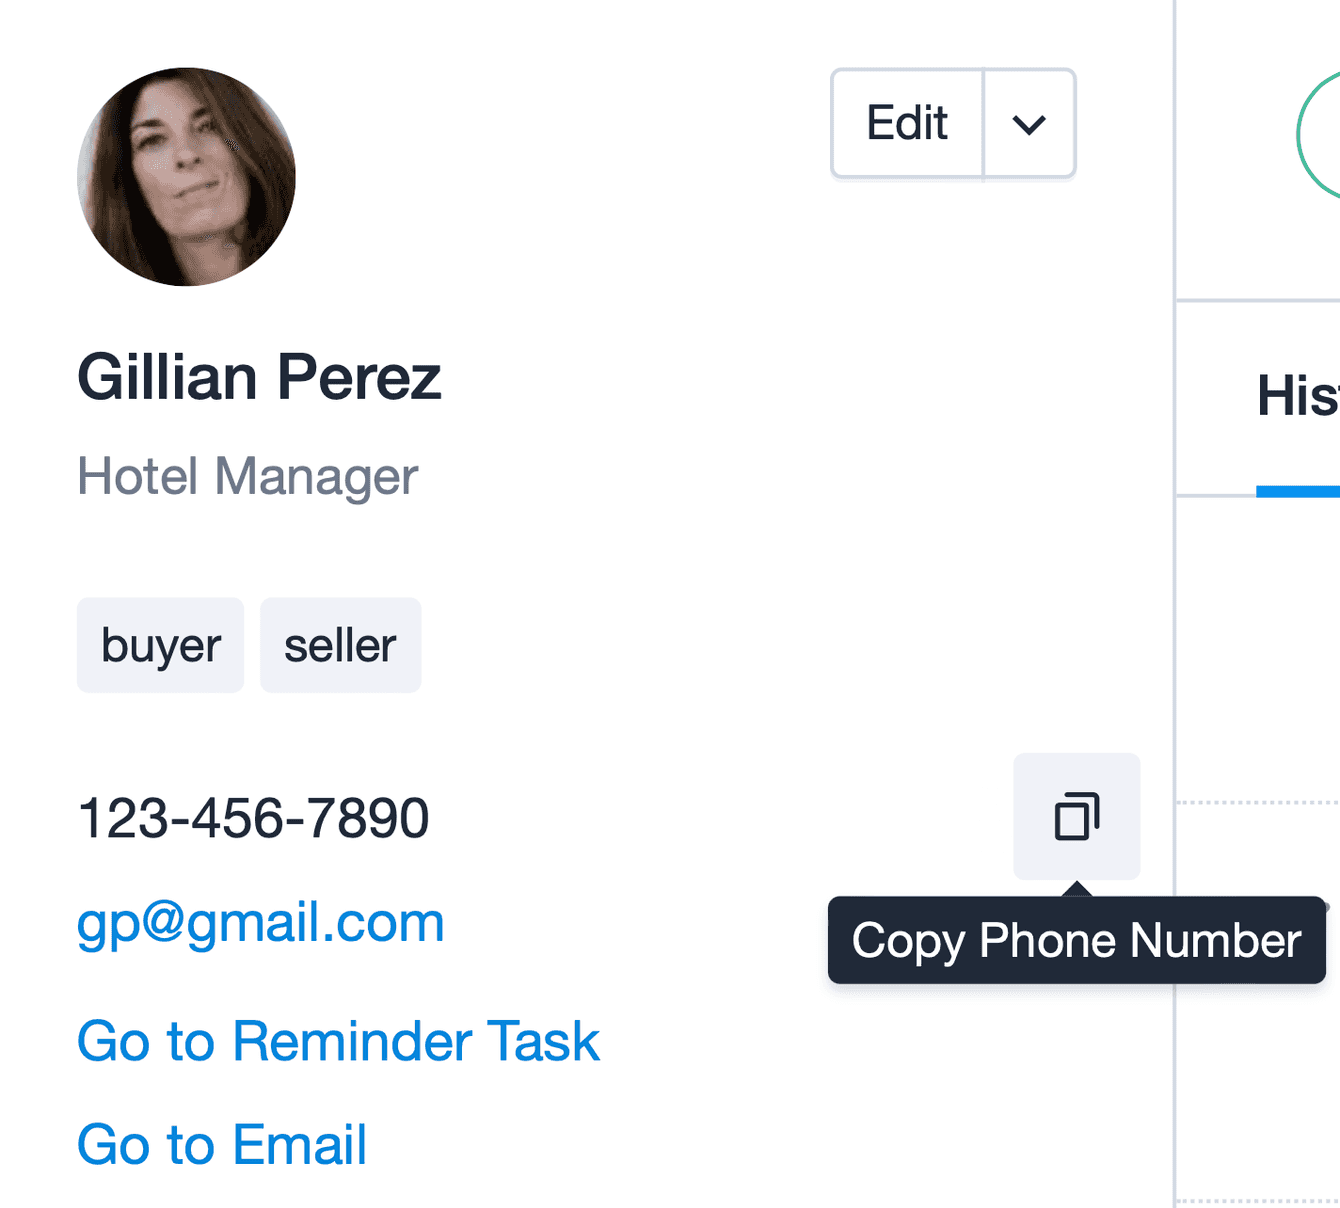 How to copy phone number in Capsule